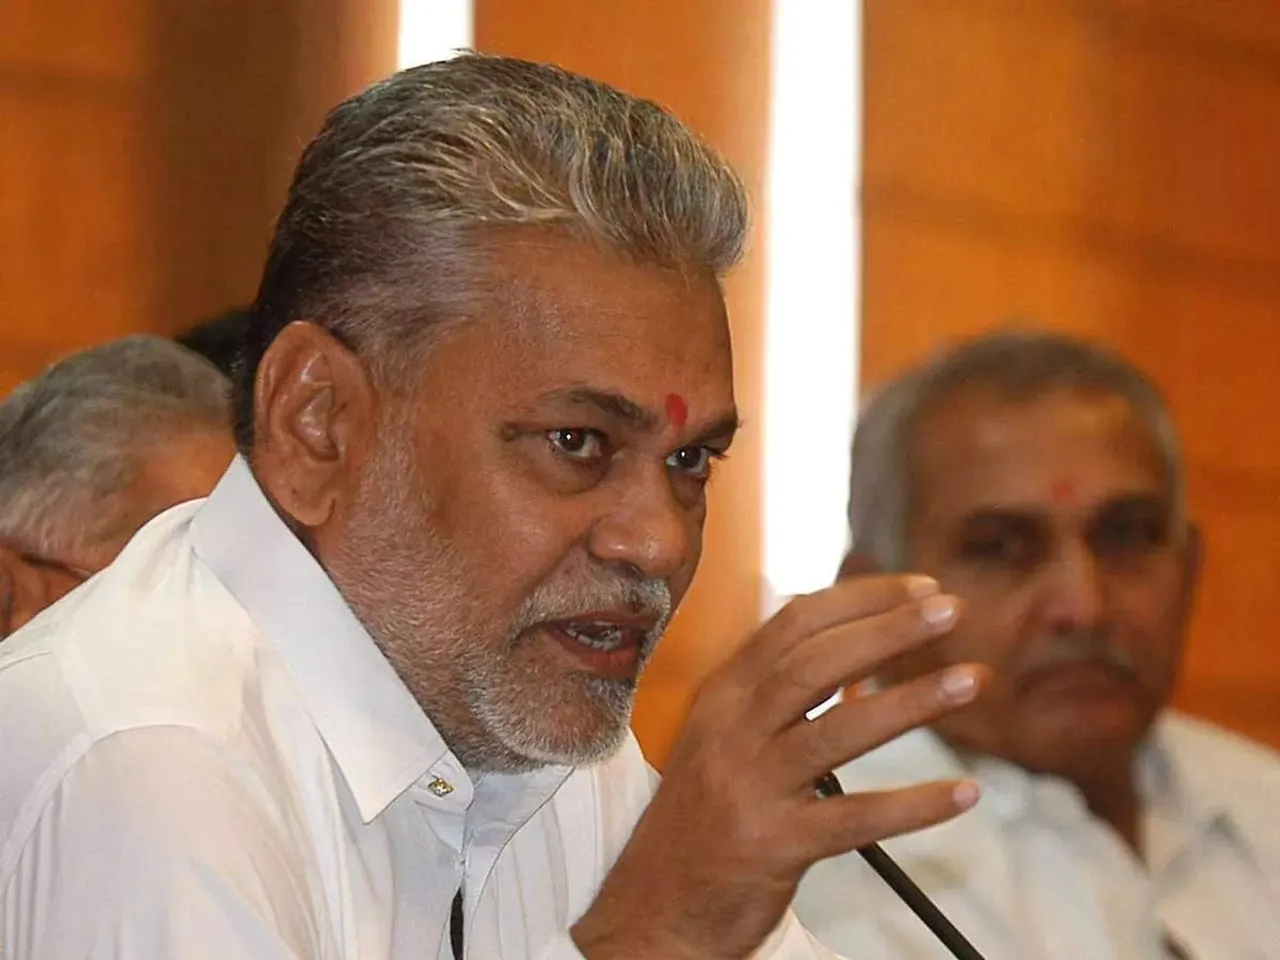 Andaman & Nicobar Islands has potential to become India's biggest export hub in fishery sector: Parshottam Rupala